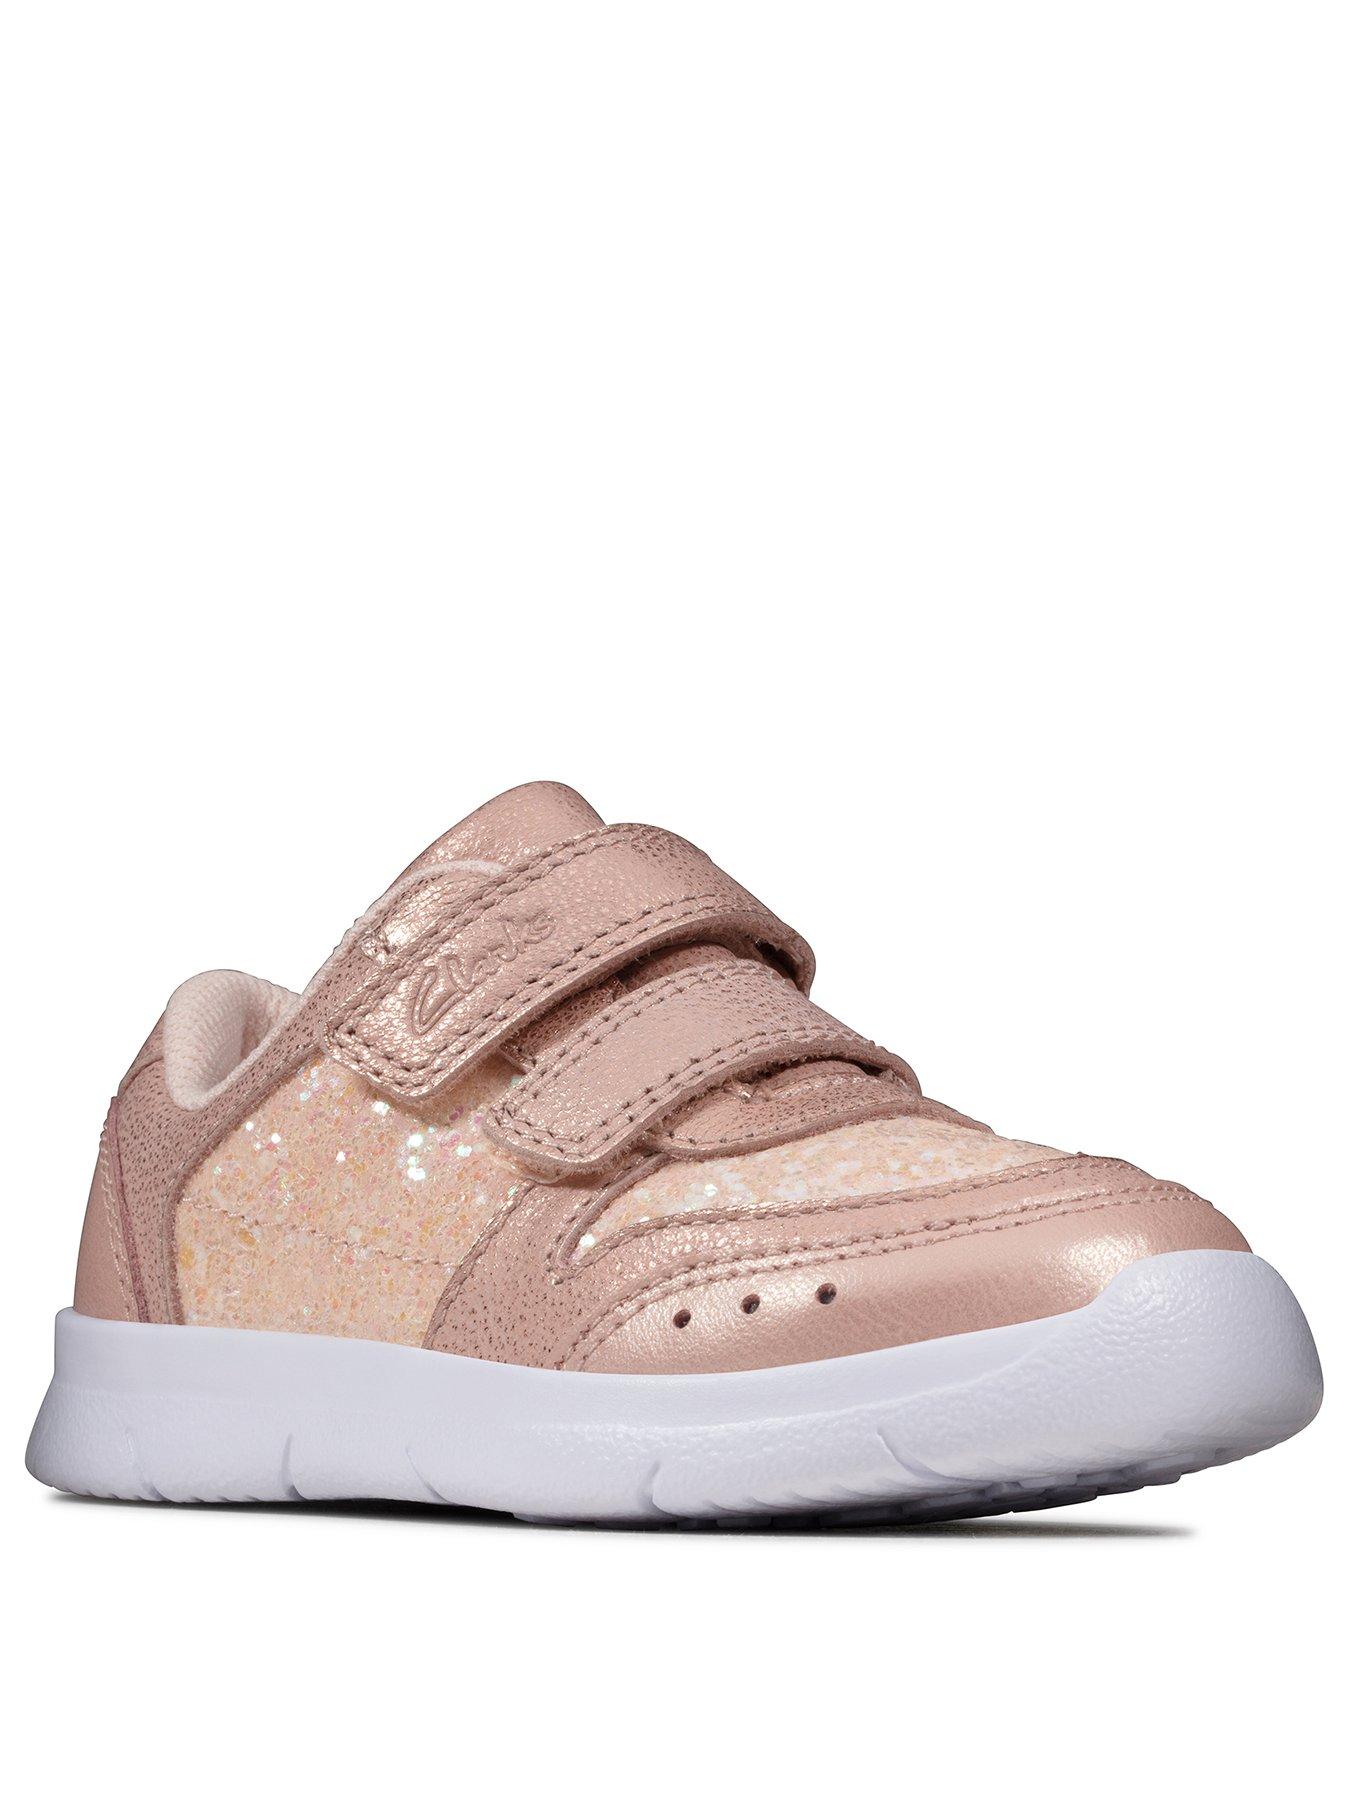 clarks trainers for toddlers